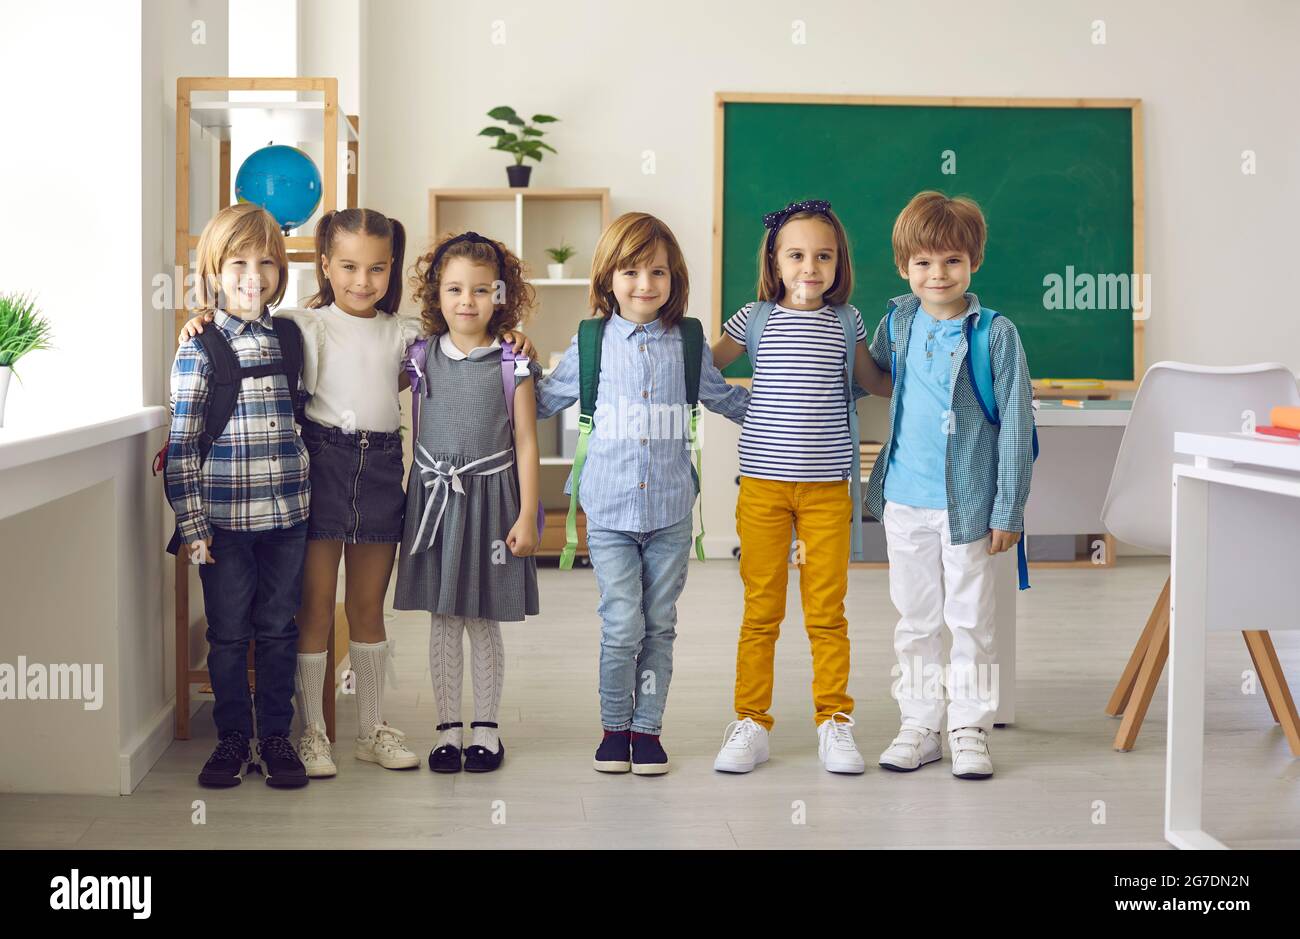 Group portrait of happy elementary school children standing in a modern classroom Stock Photo